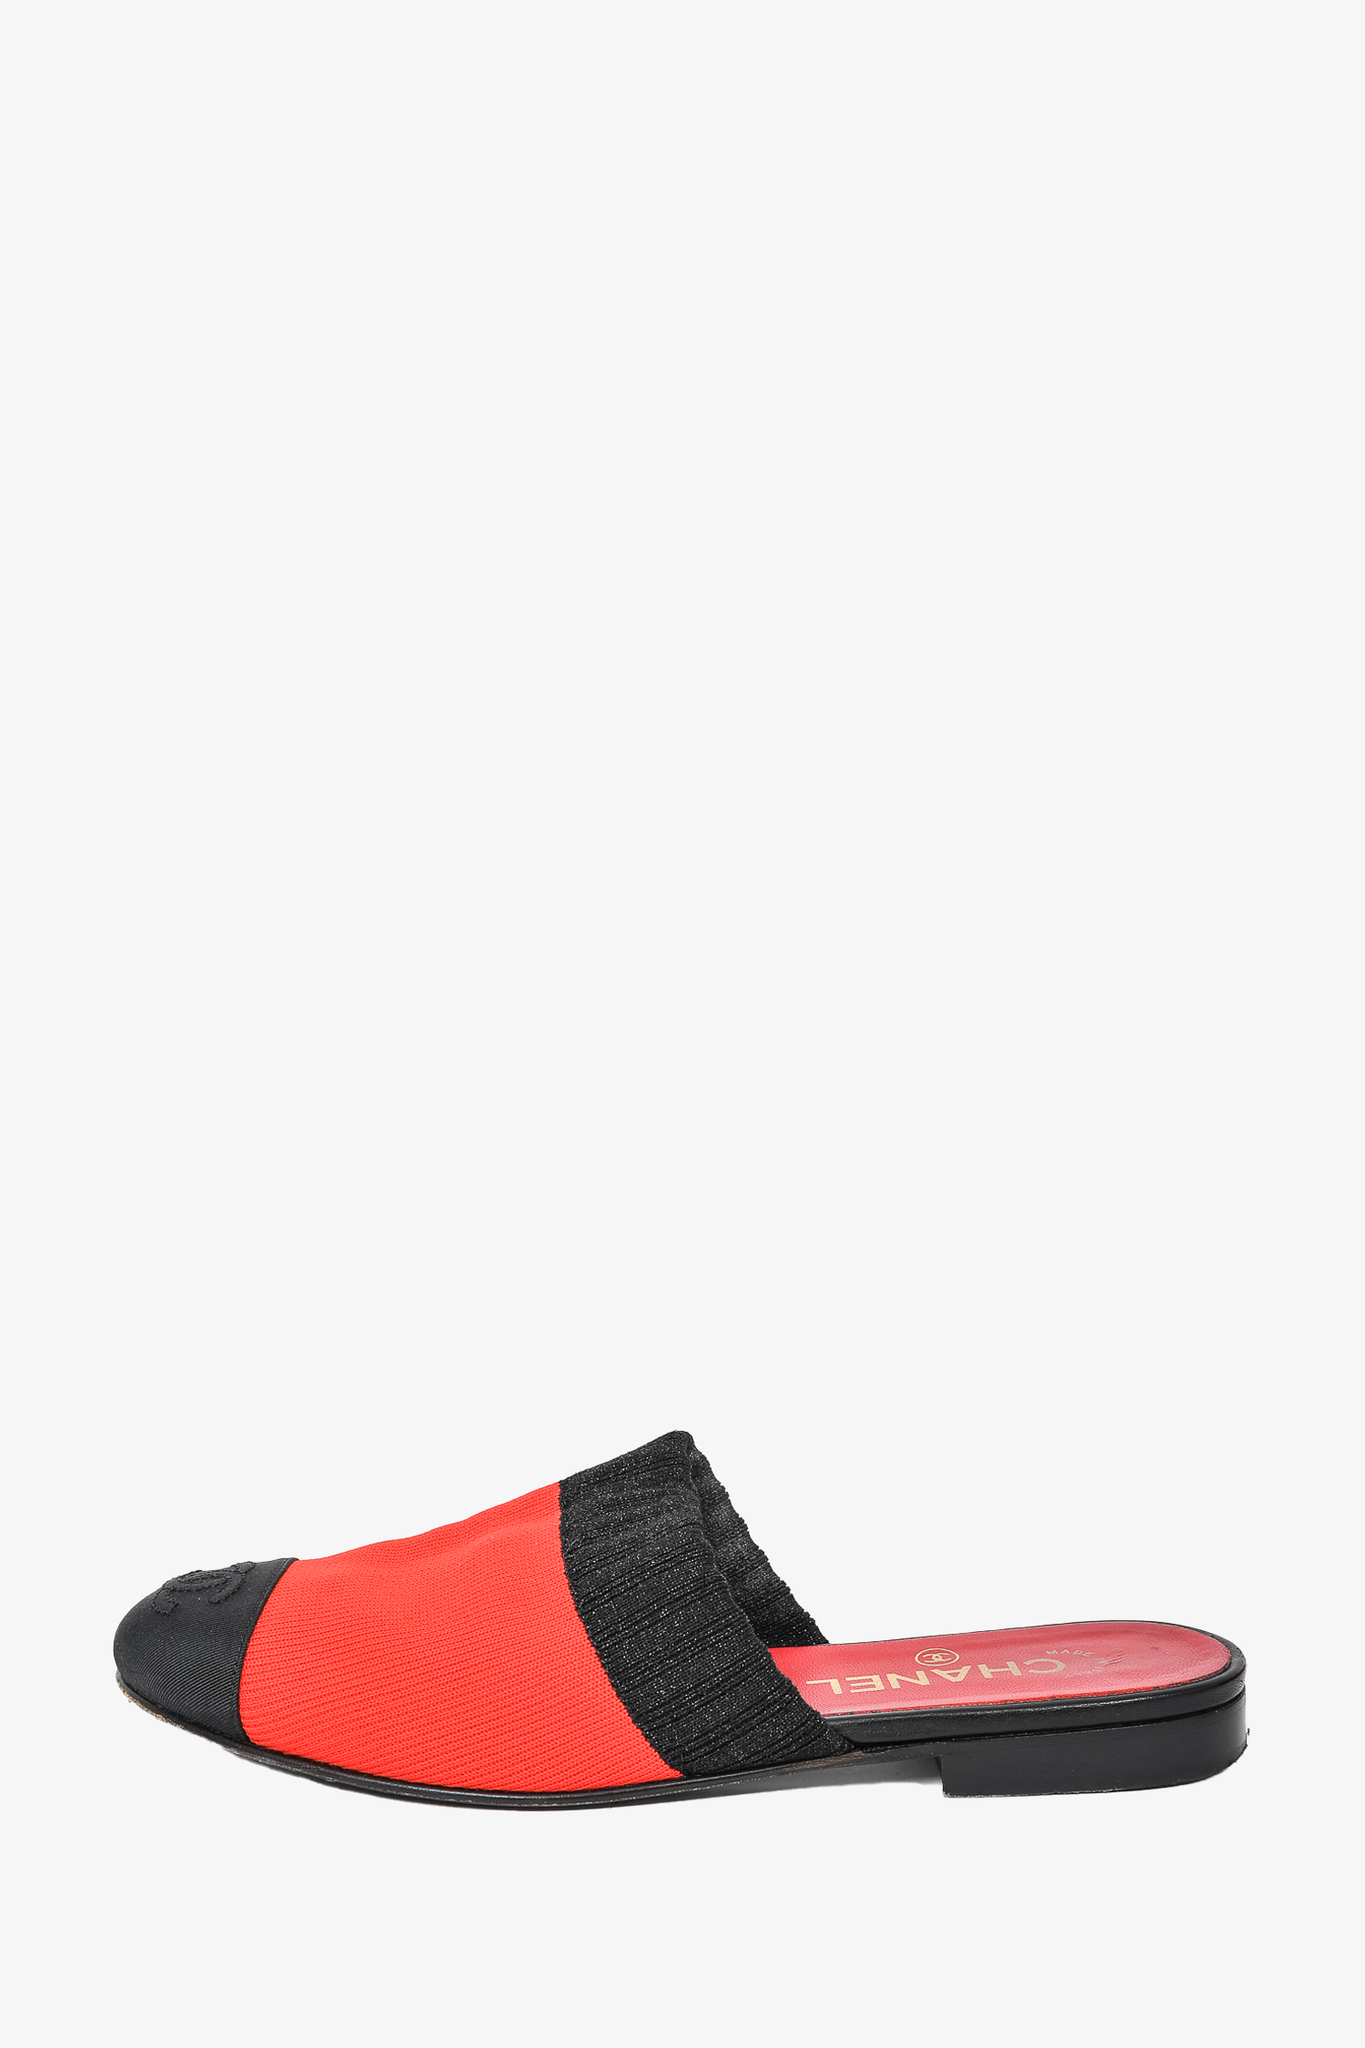 Chanel Red/Black Fabric Flat Mules Size 37